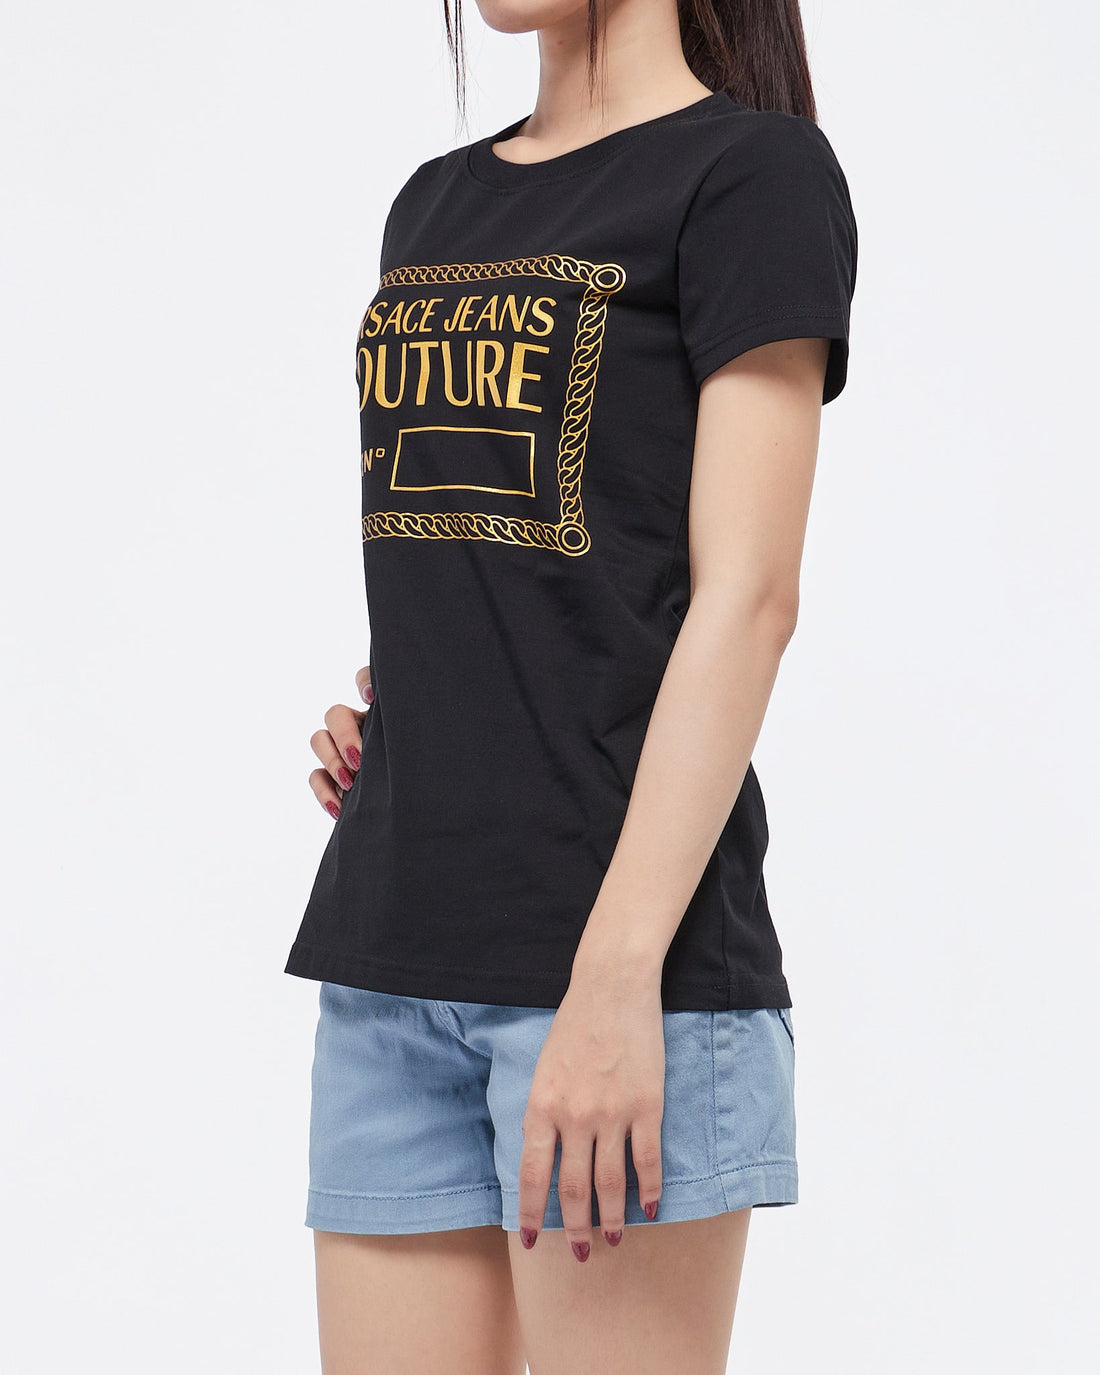 MOI OUTFIT-V Couture Chain Gold Printed Lady T-Shirt 14.50